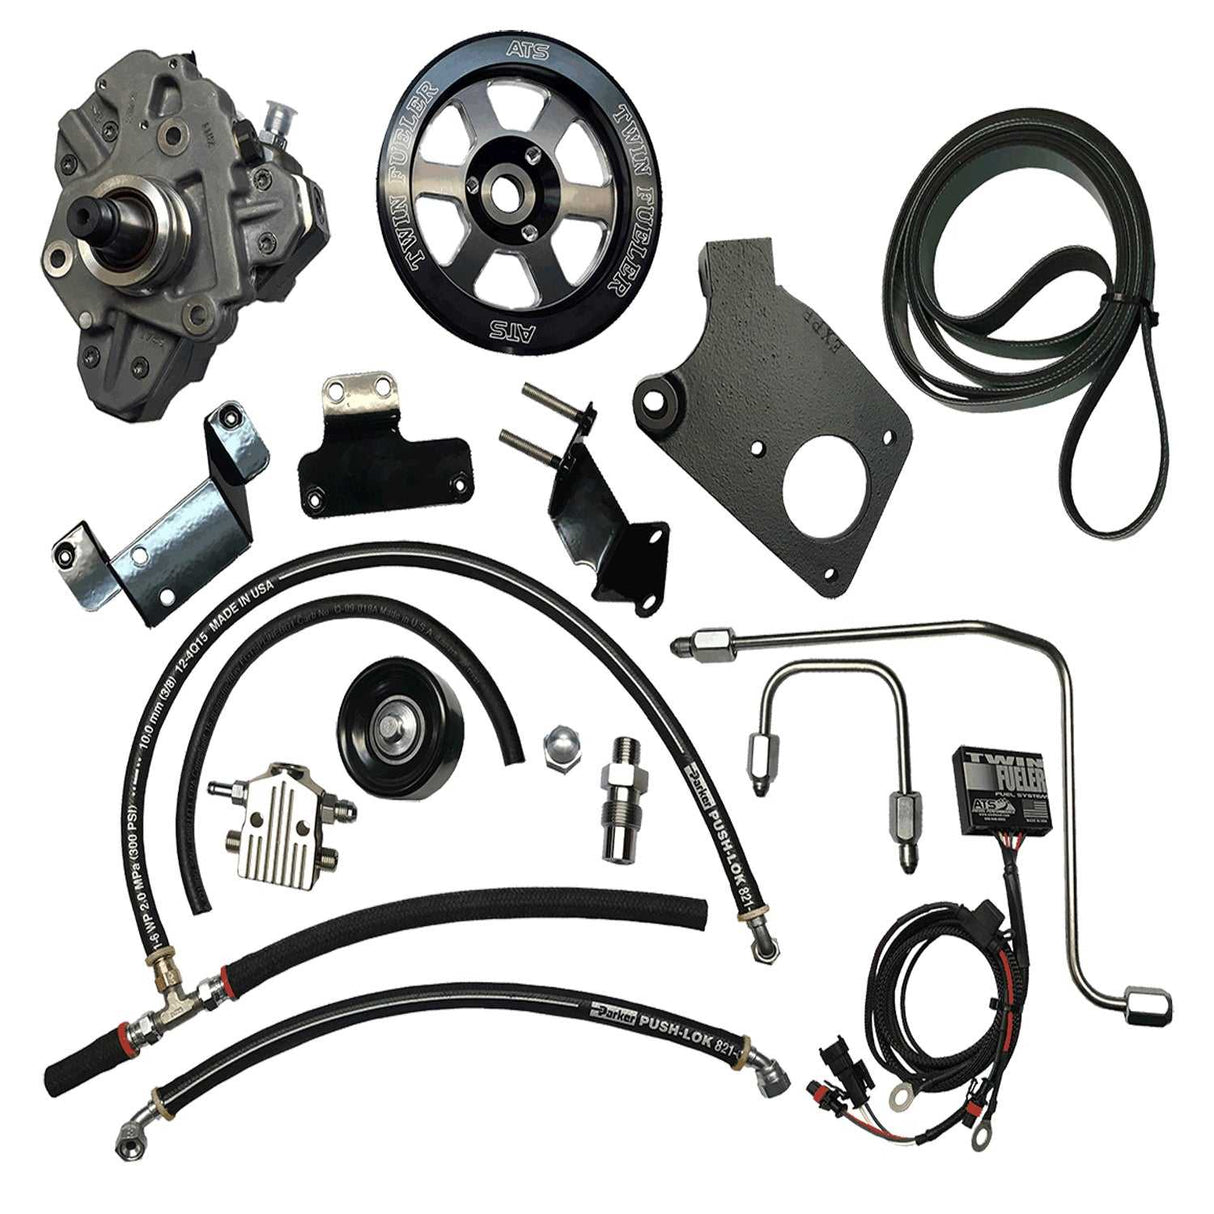 7019004290 ATS Diesel Performance Fuel Injection Pump Upgrade Kit To